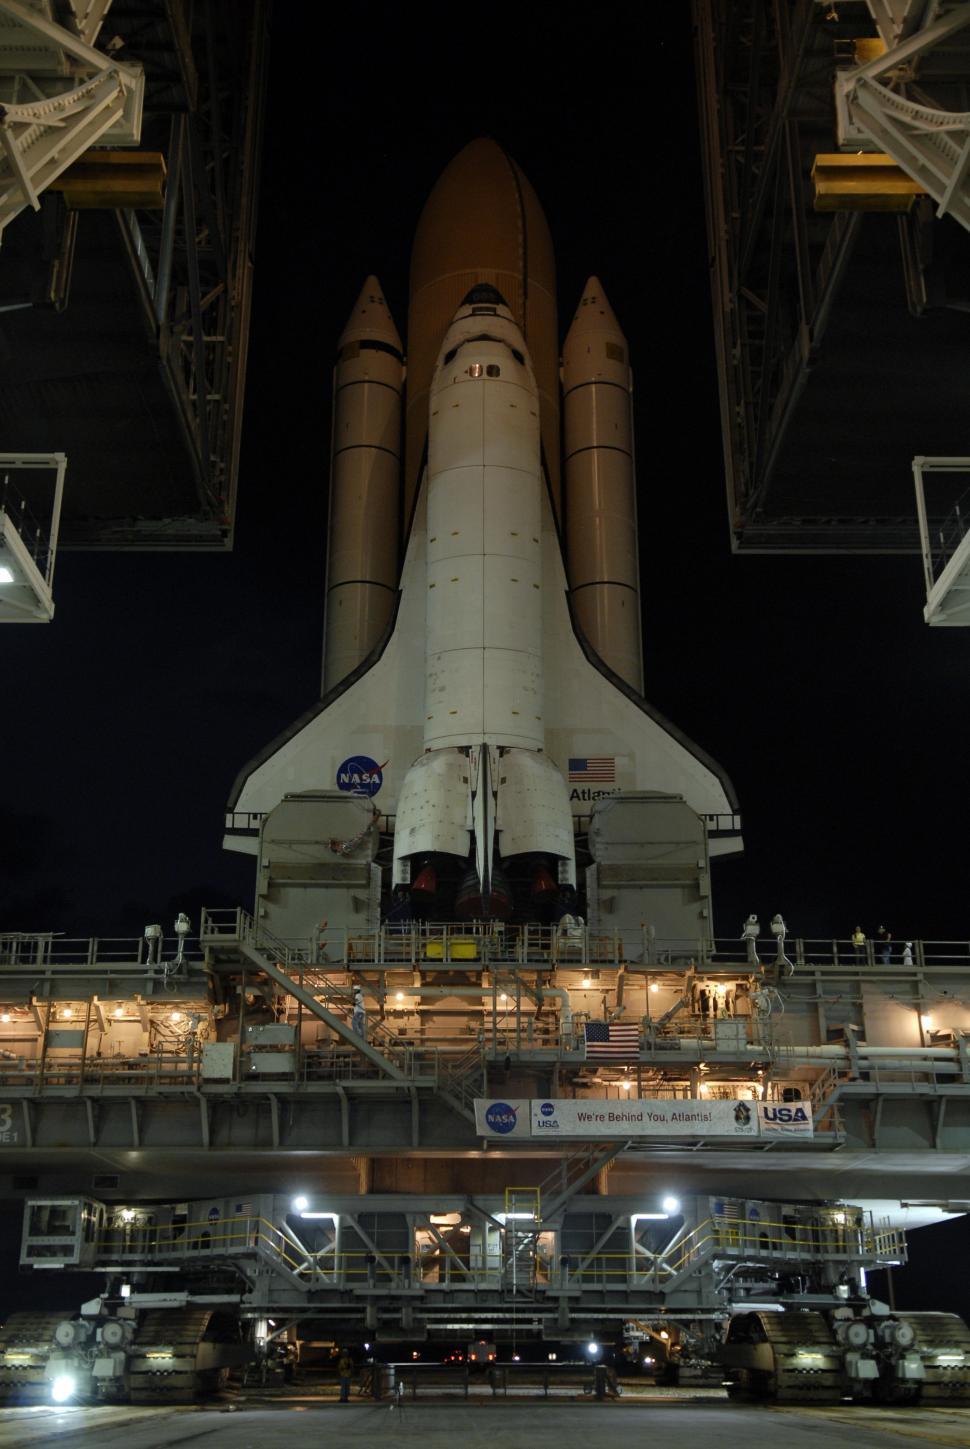 Free Image of The Space Shuttle Displayed at the Museum 